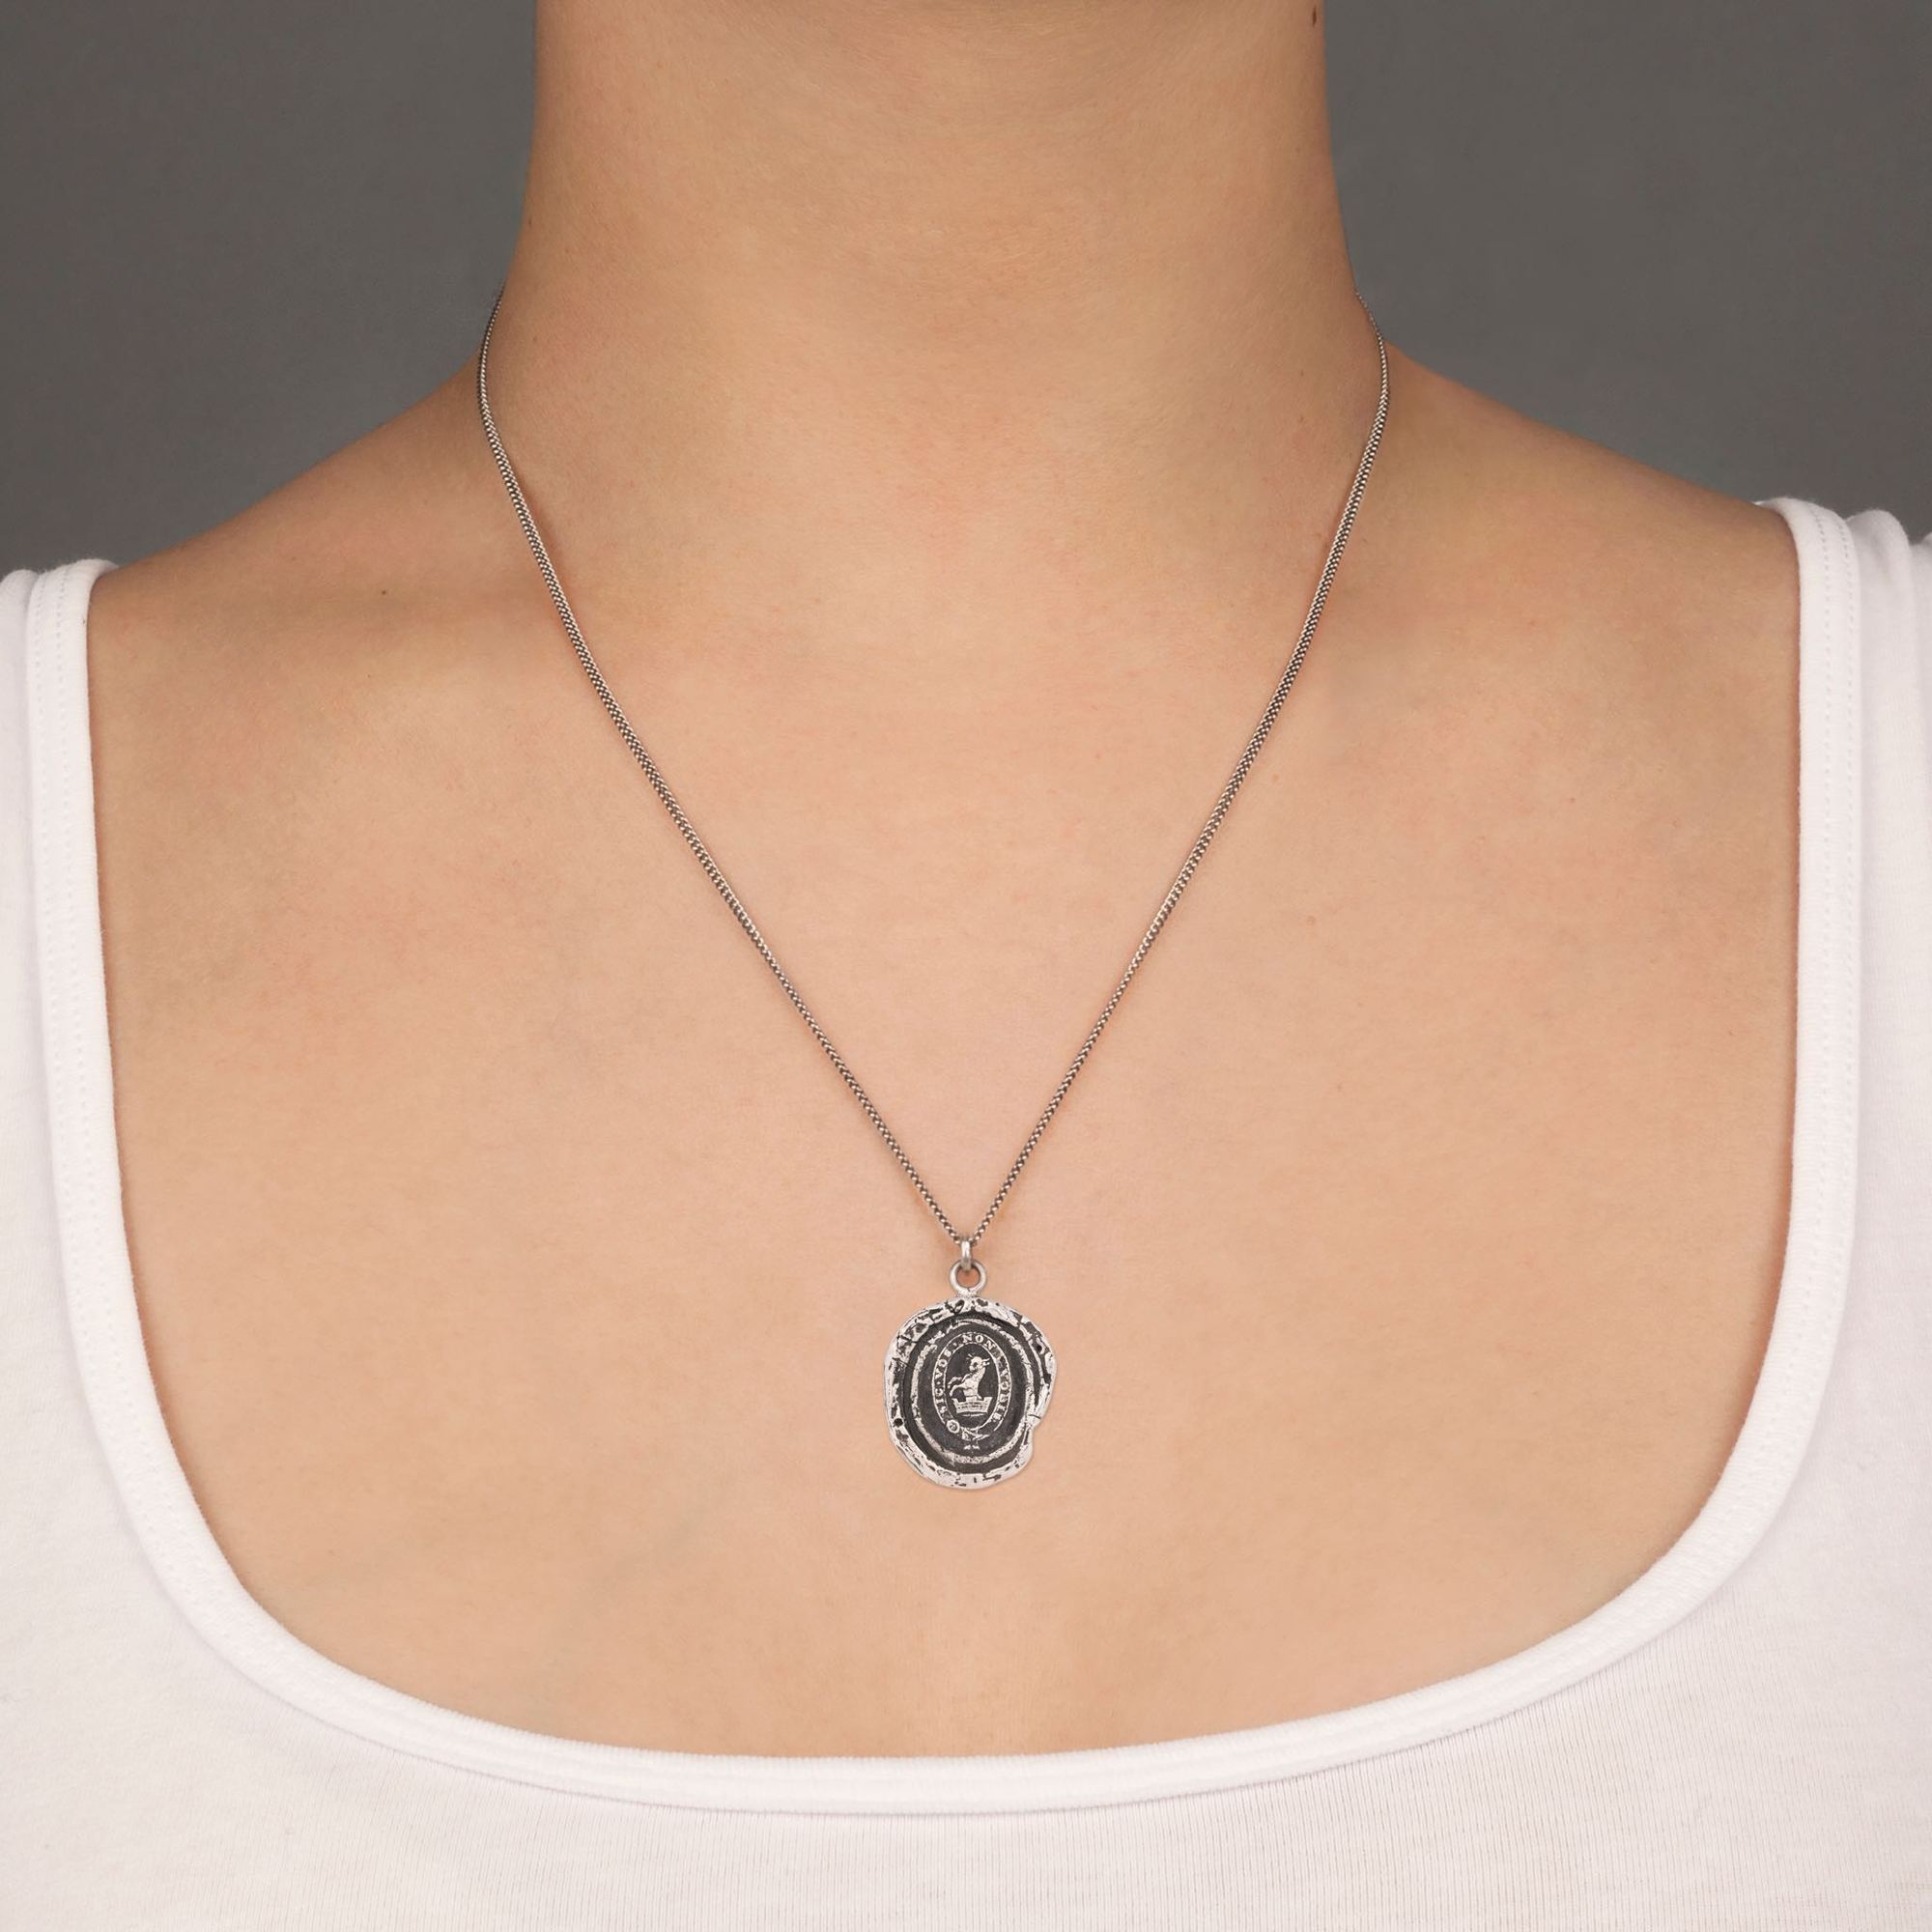 Devoted Father Talisman Necklace